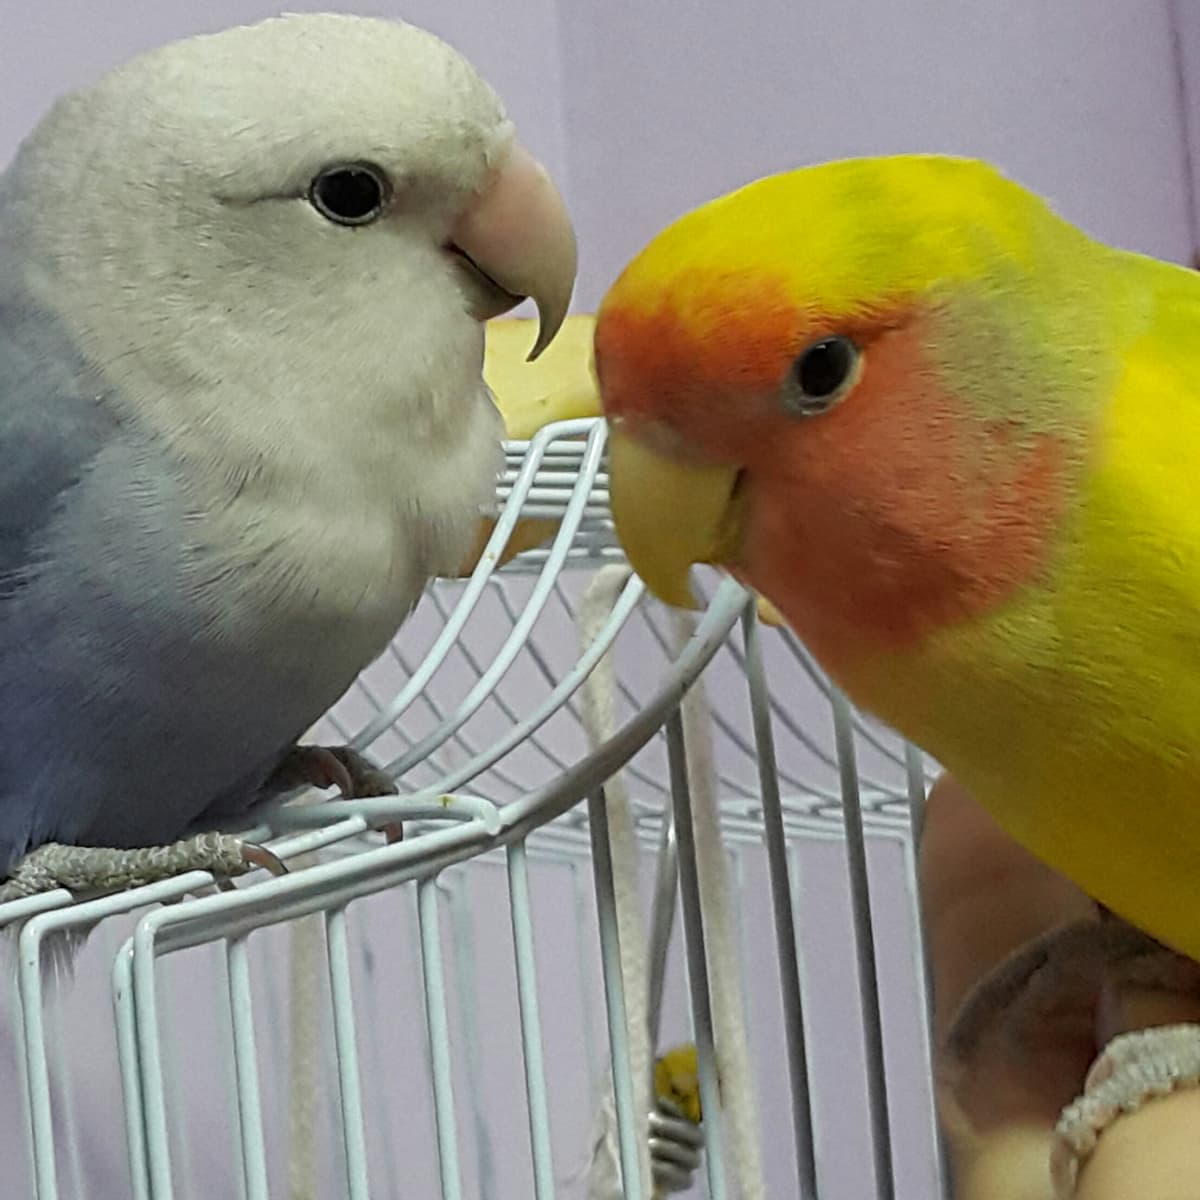 Lovebird Courtship and Mating Breeding, Nesting, Behavior, and More pic